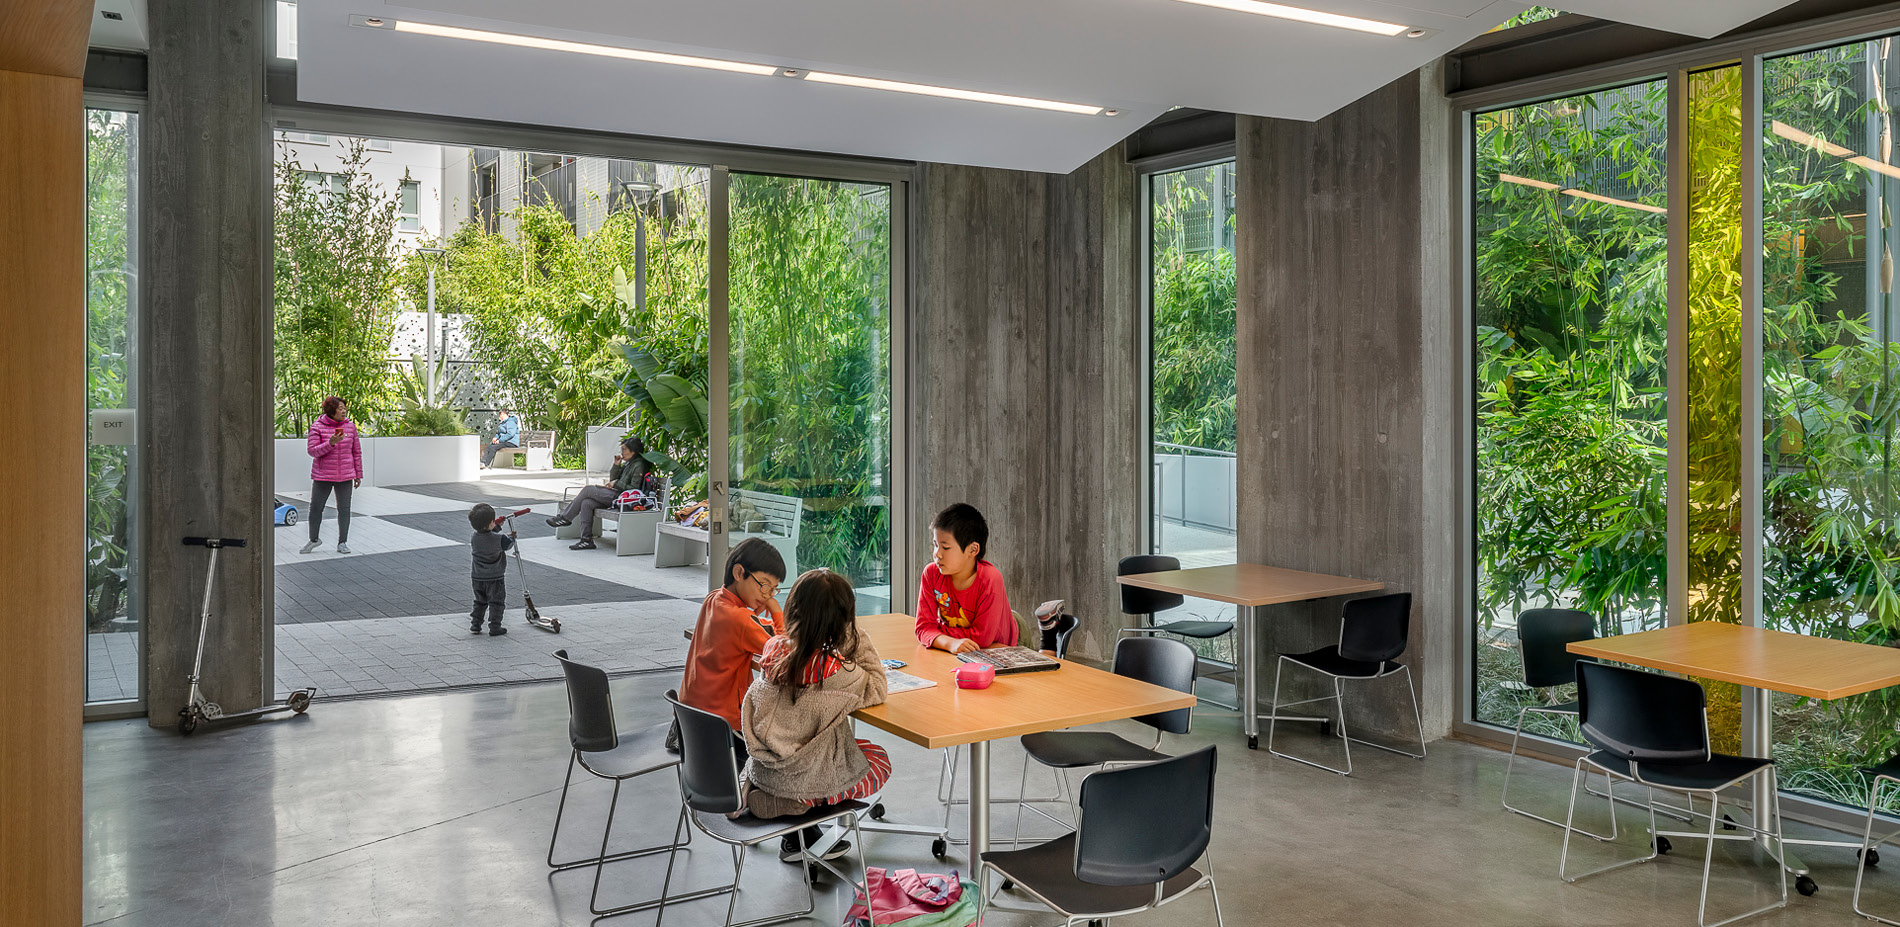 Community Room Opens to Central Courtyard